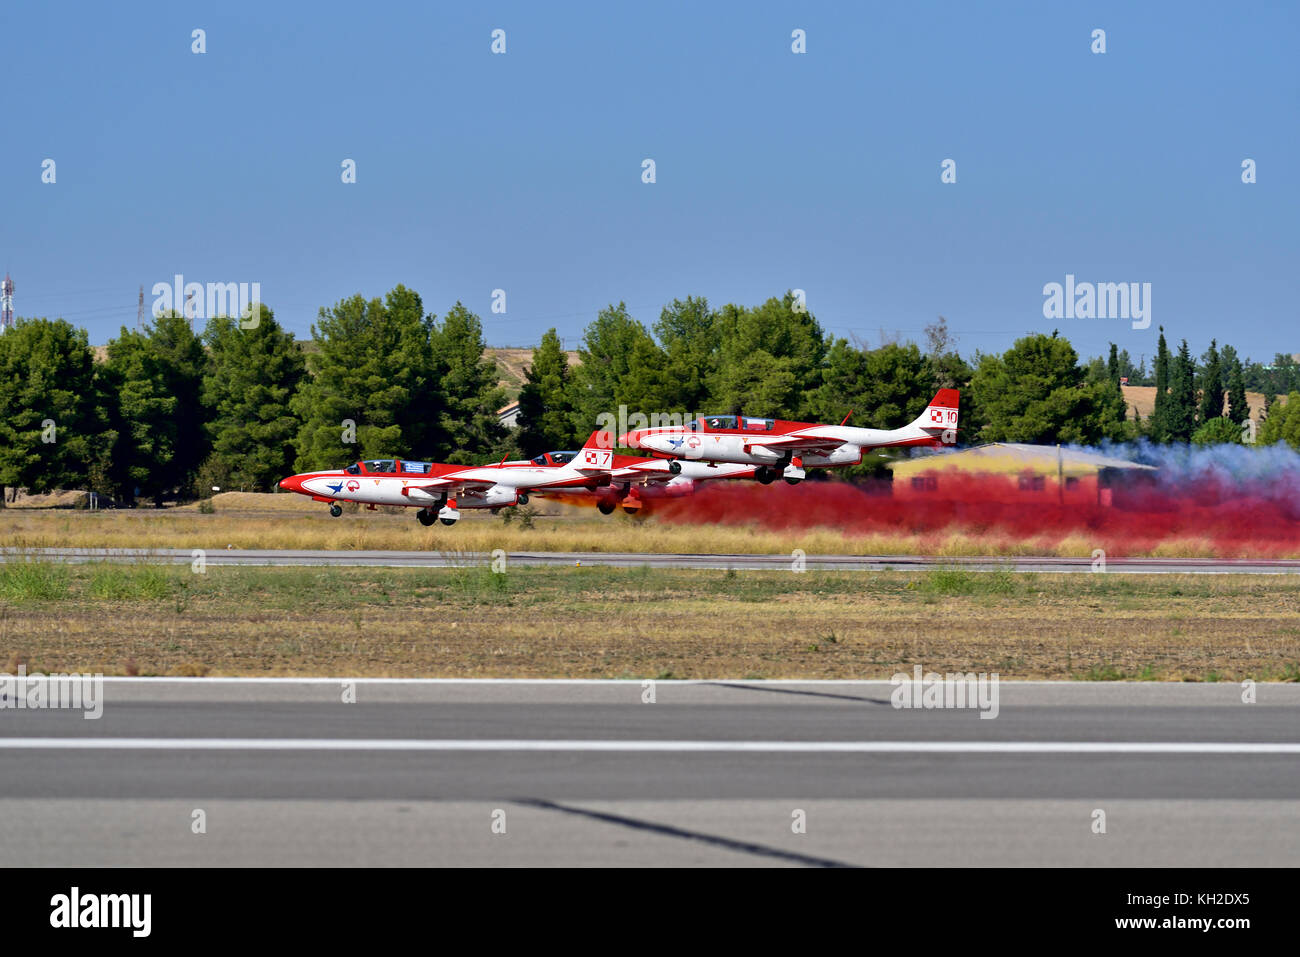 ISKRA Polish Air Force Team at Athens Flying Week 2017 air-show in Tanagra Air Force base, Greece Stock Photo